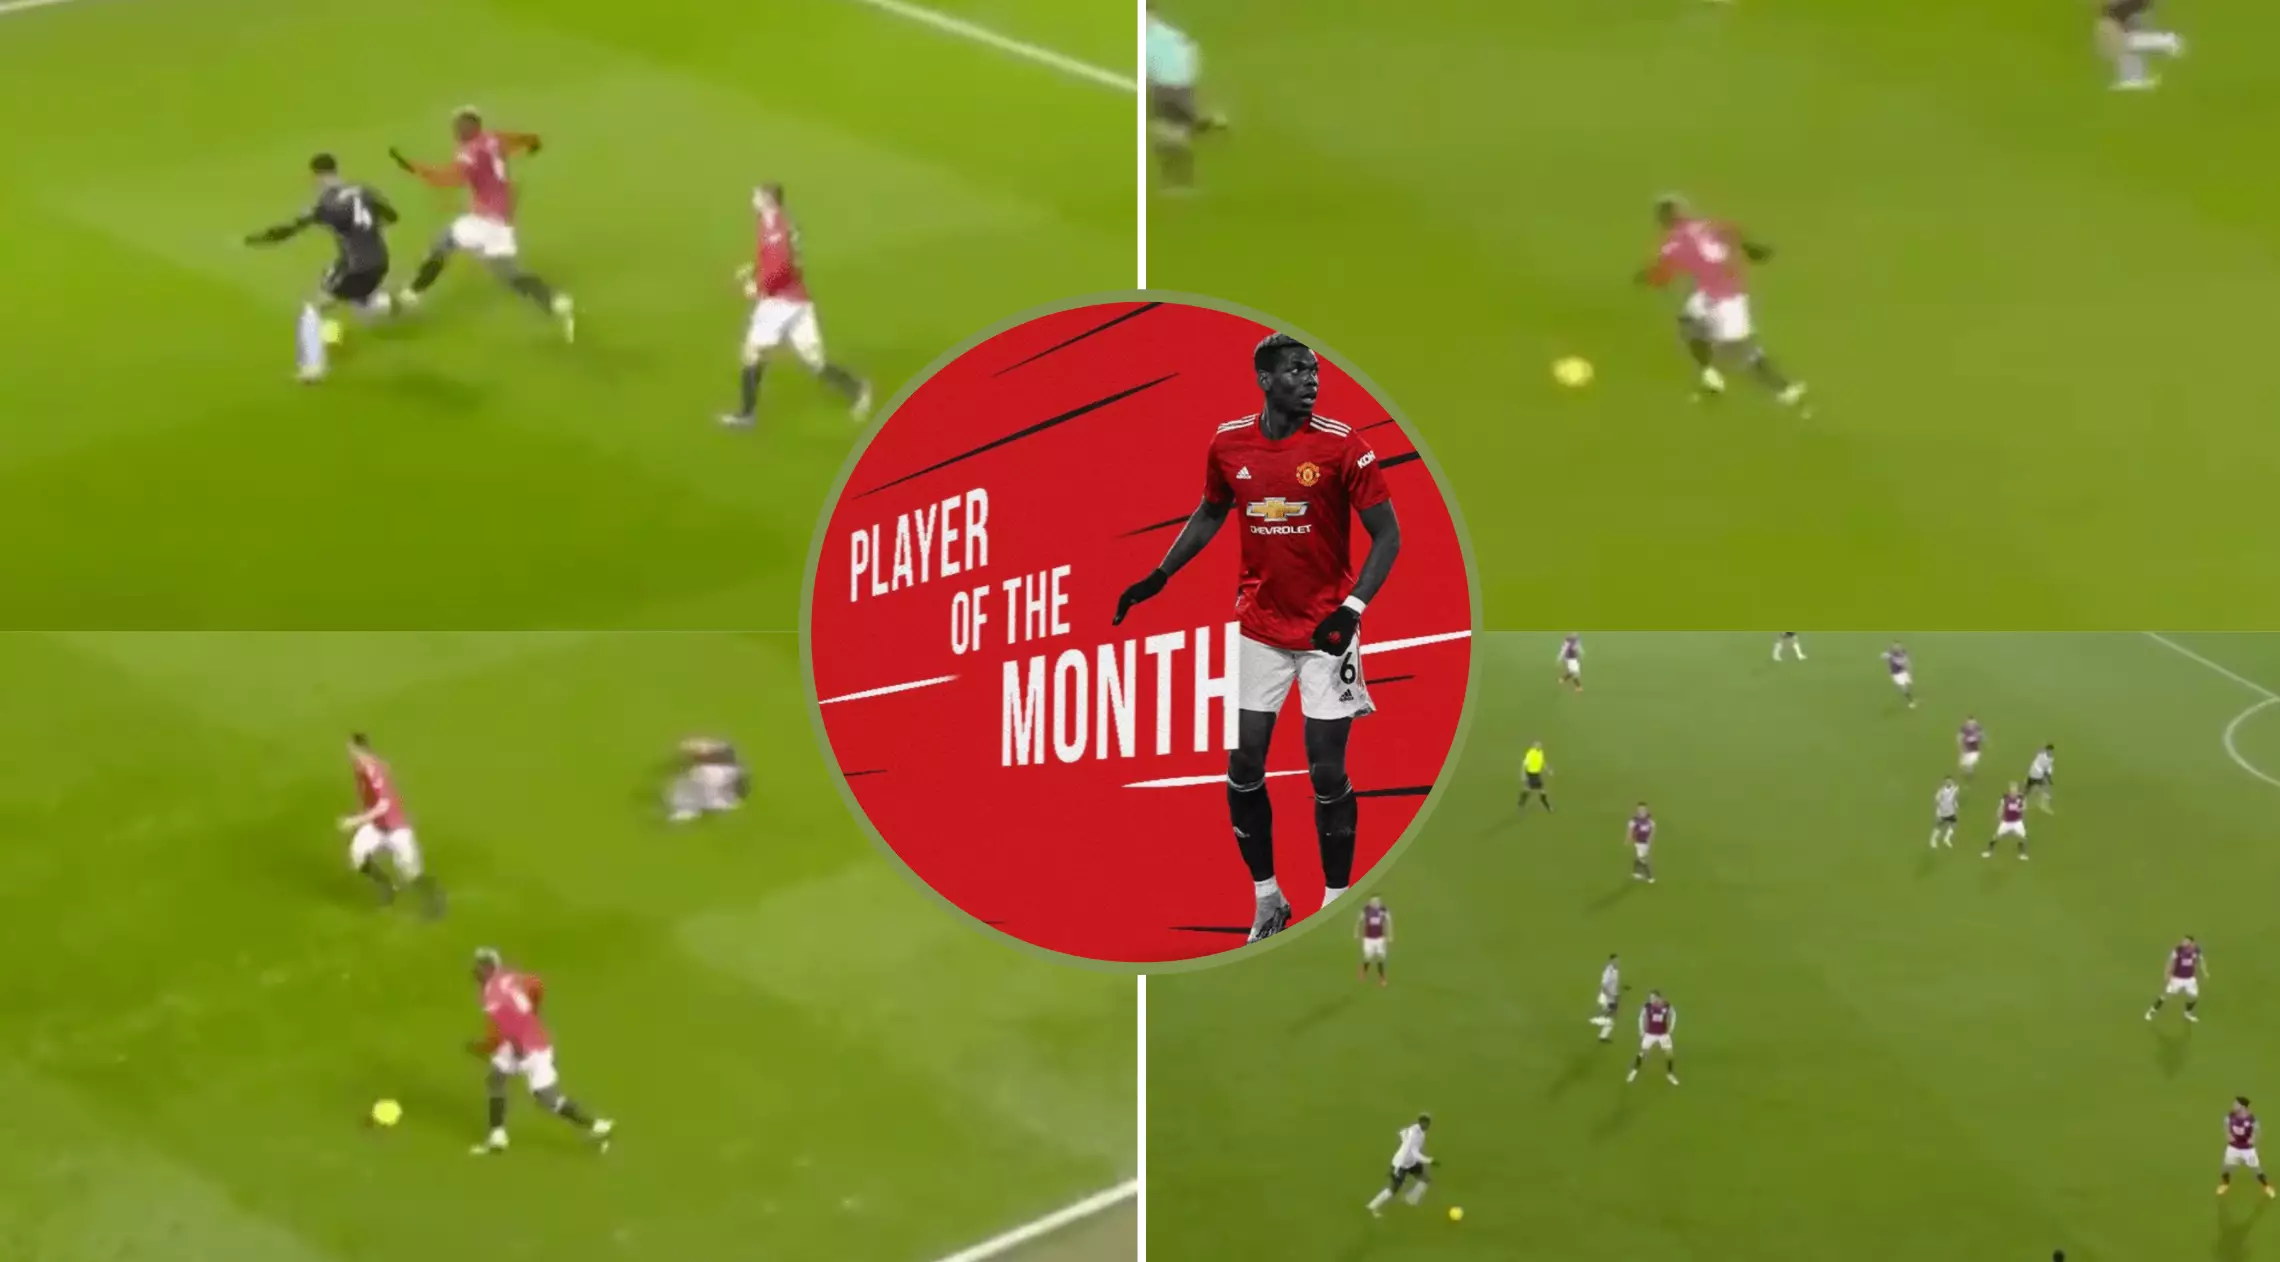 Paul Pogba’s ‘Unseen’ January Highlights Show He’s In Best Form Of His Career